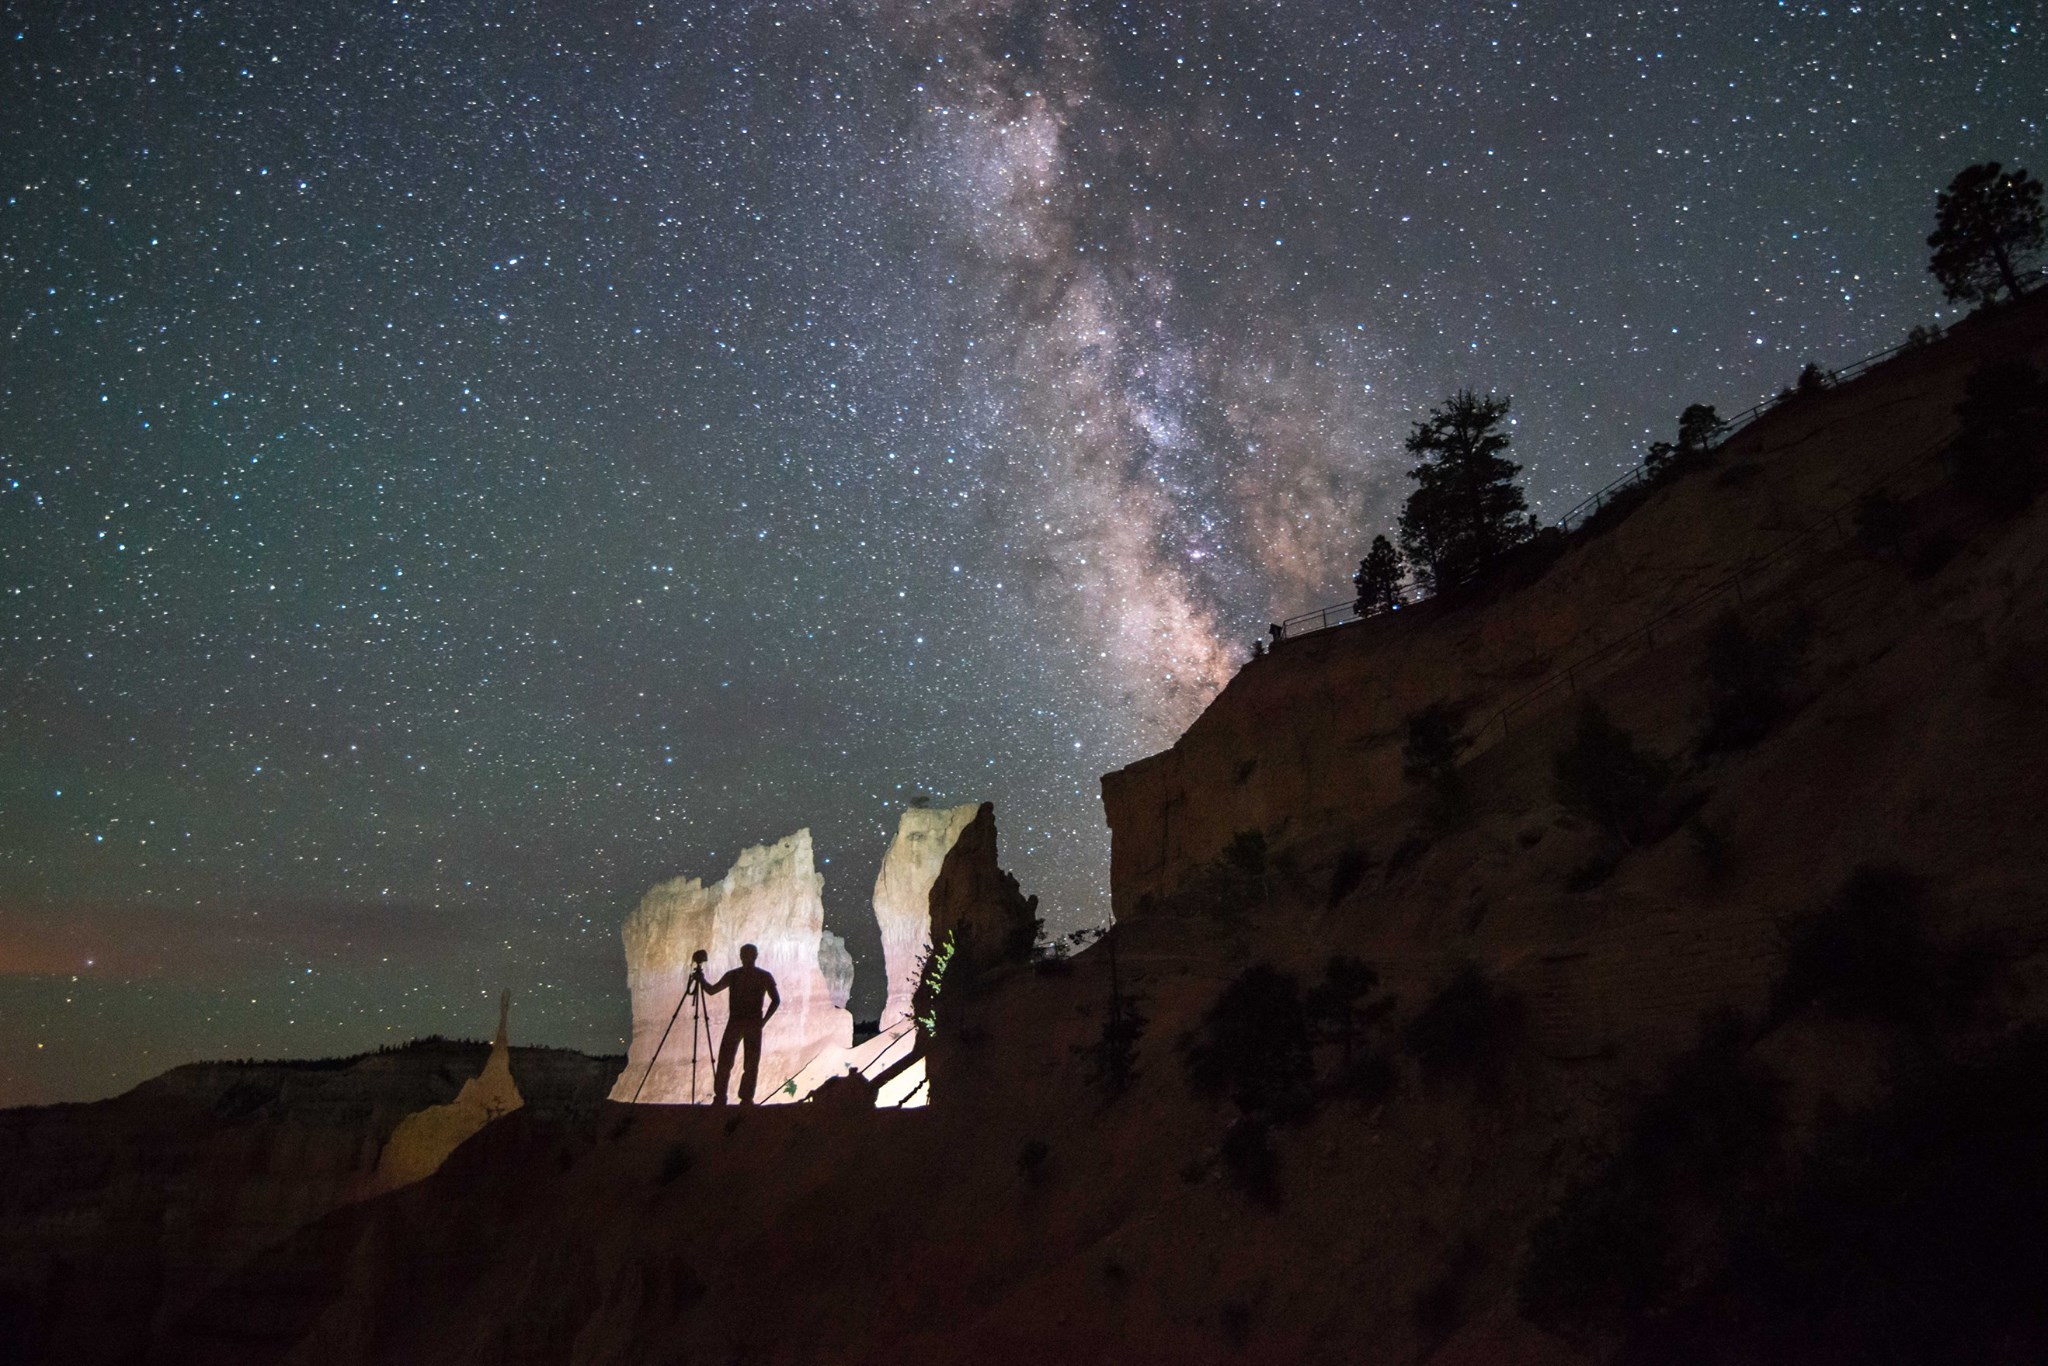 Silhouette Photographer in Bryce Canyon with Milky Way